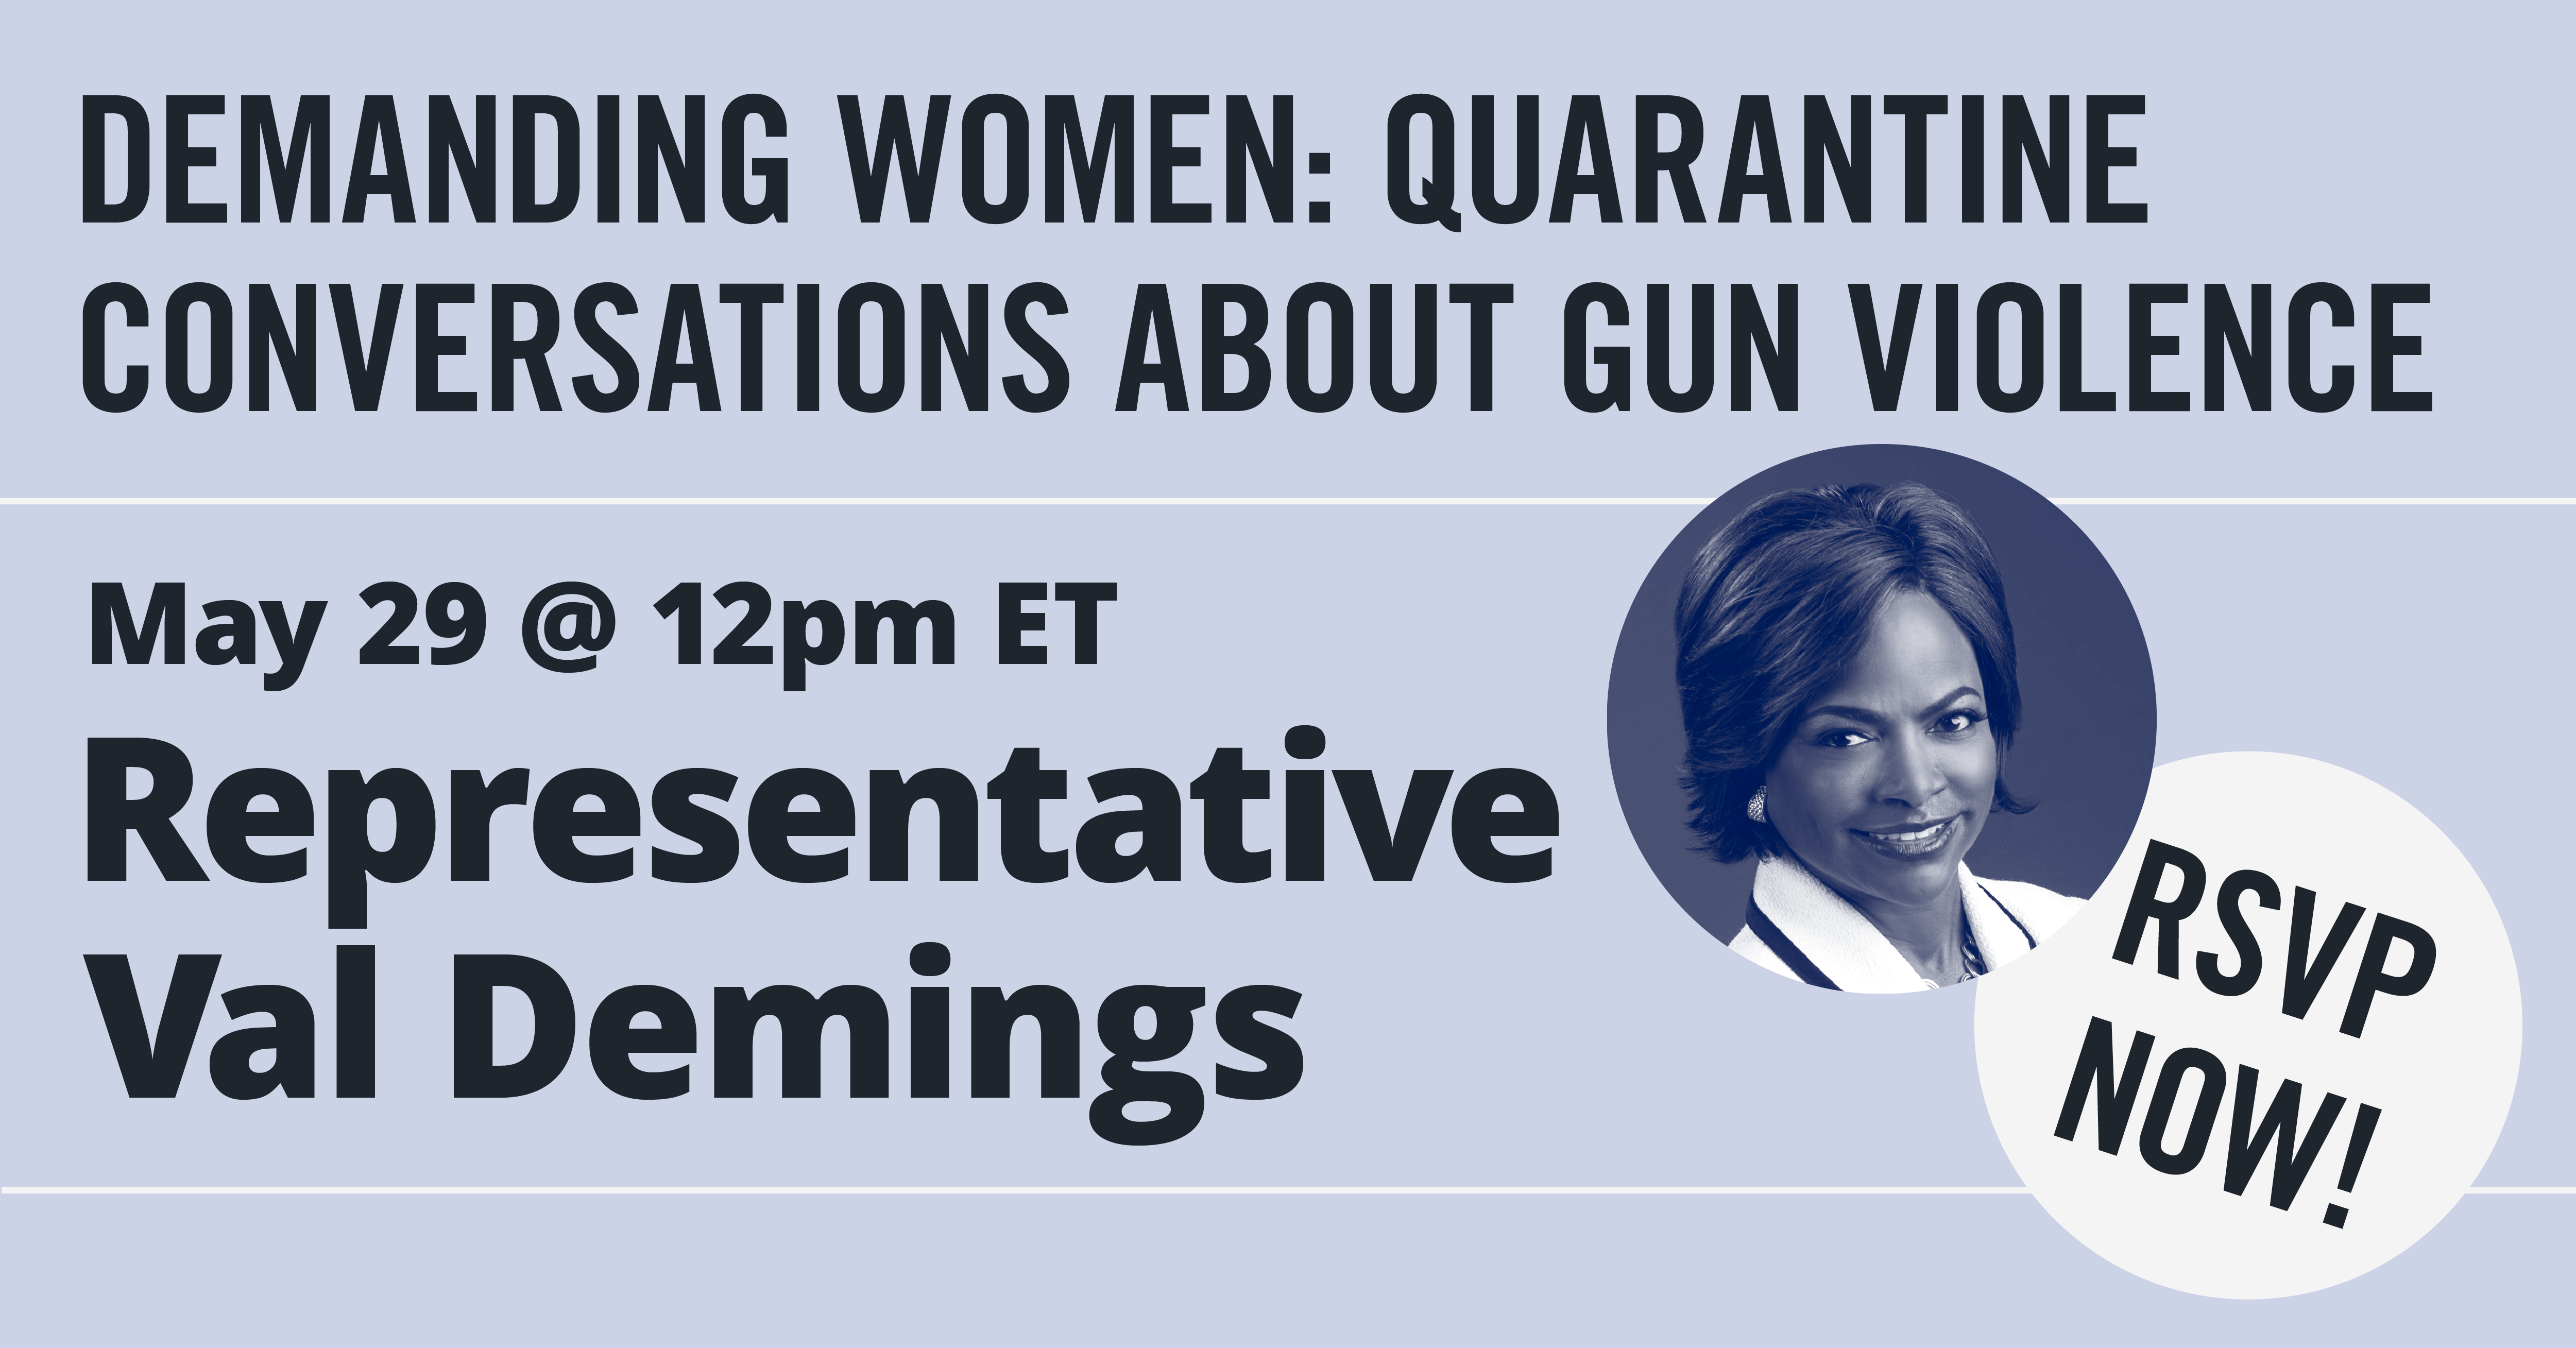 RSVP Now For A Conversation with Representative Val Demings!